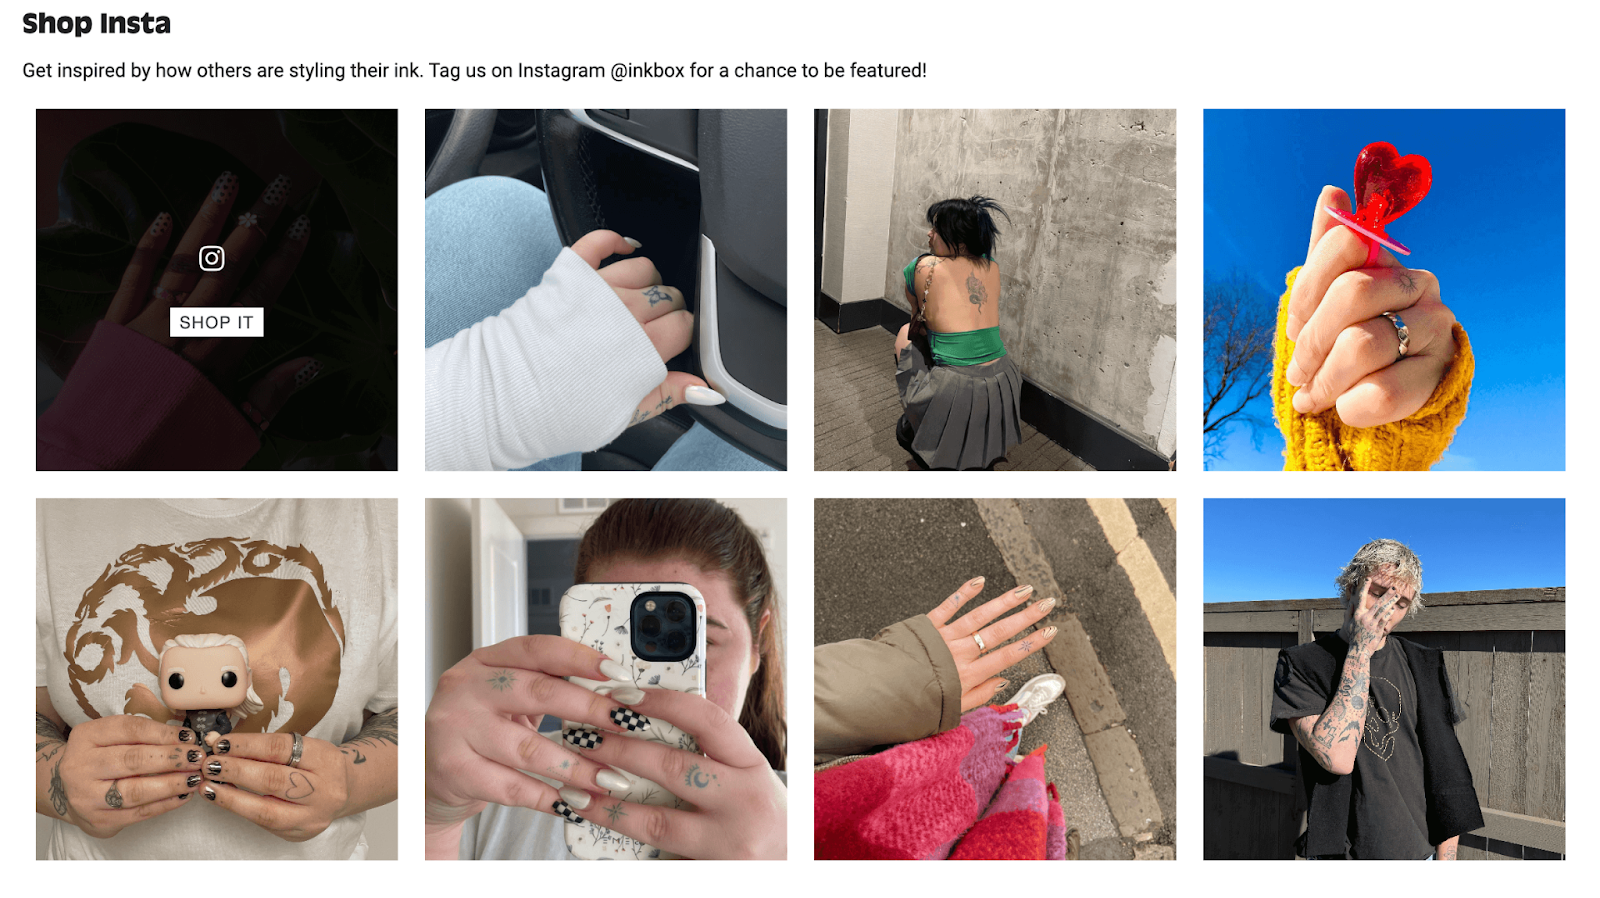 Building emotional connections online–A screenshot from Inkbox’s homepage showing a grid of 8 user-generated Instagram photos. The text reads, “Shop Insta. Get inspired by how others are styling their ink. Tag us on Instagram @inkbox for a chance to be featured! ”